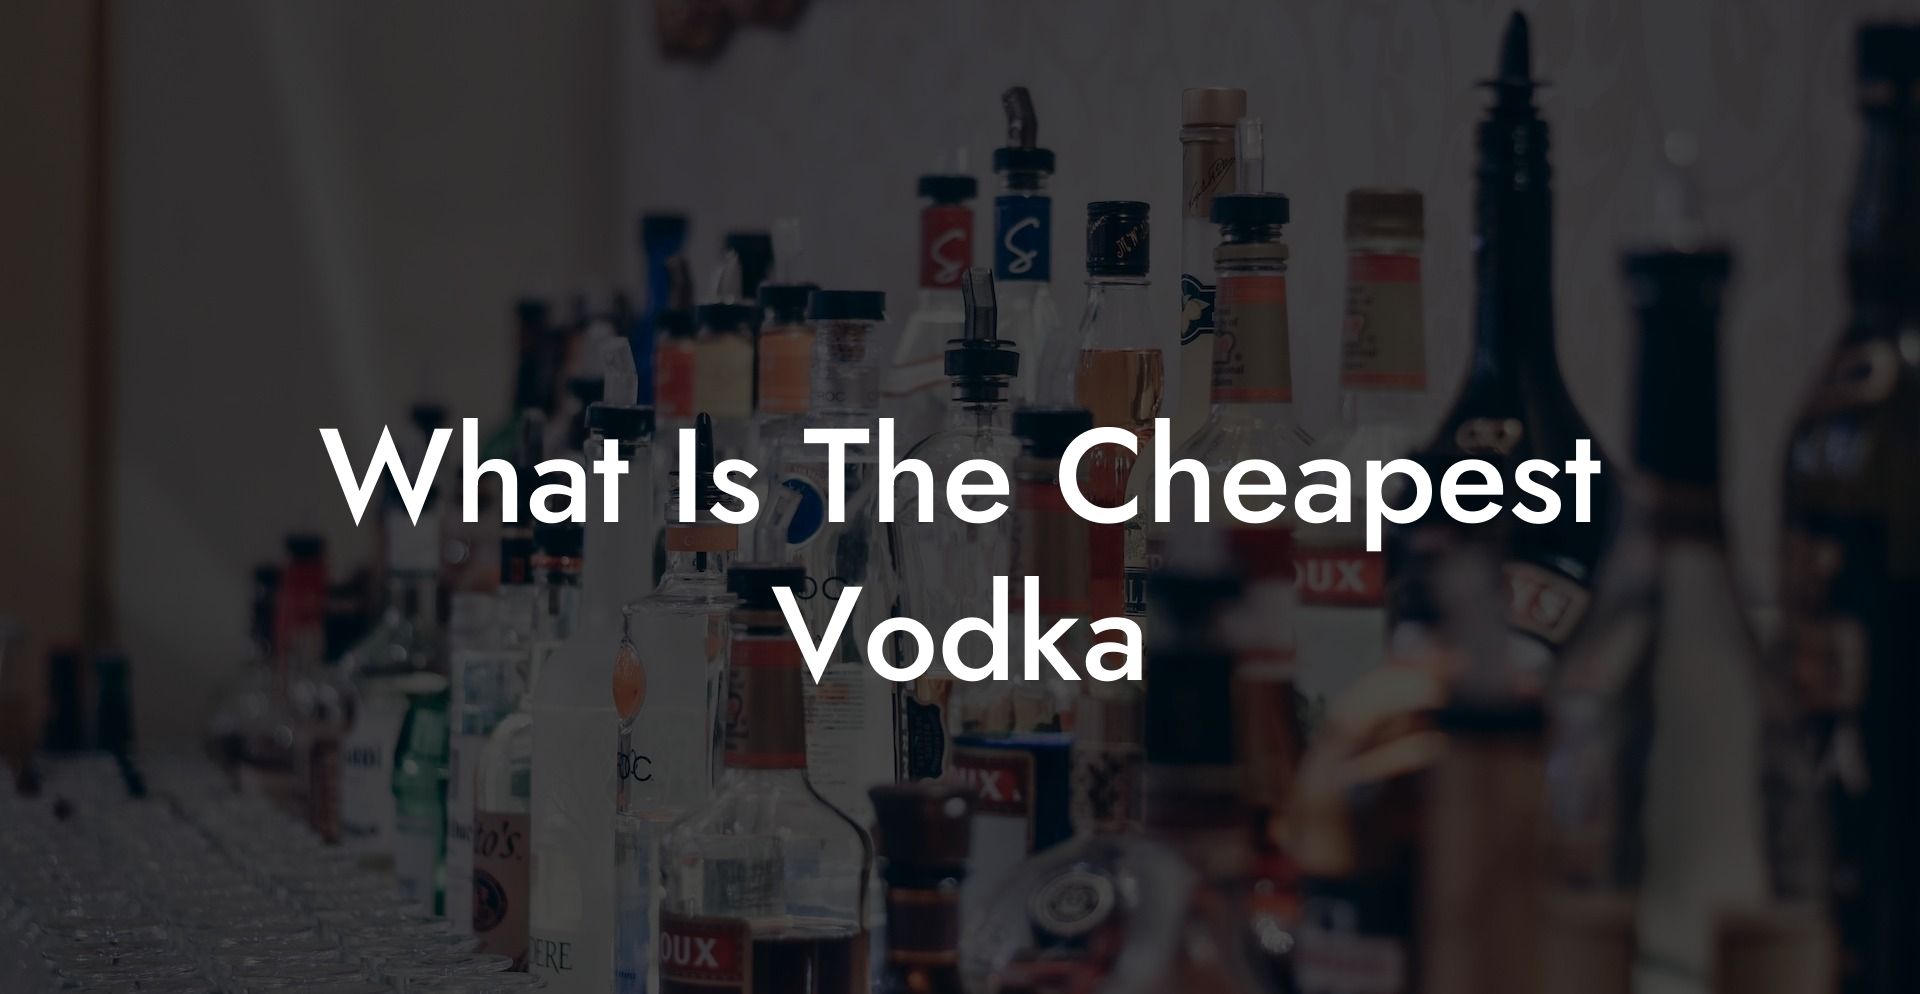 What Is The Cheapest Vodka